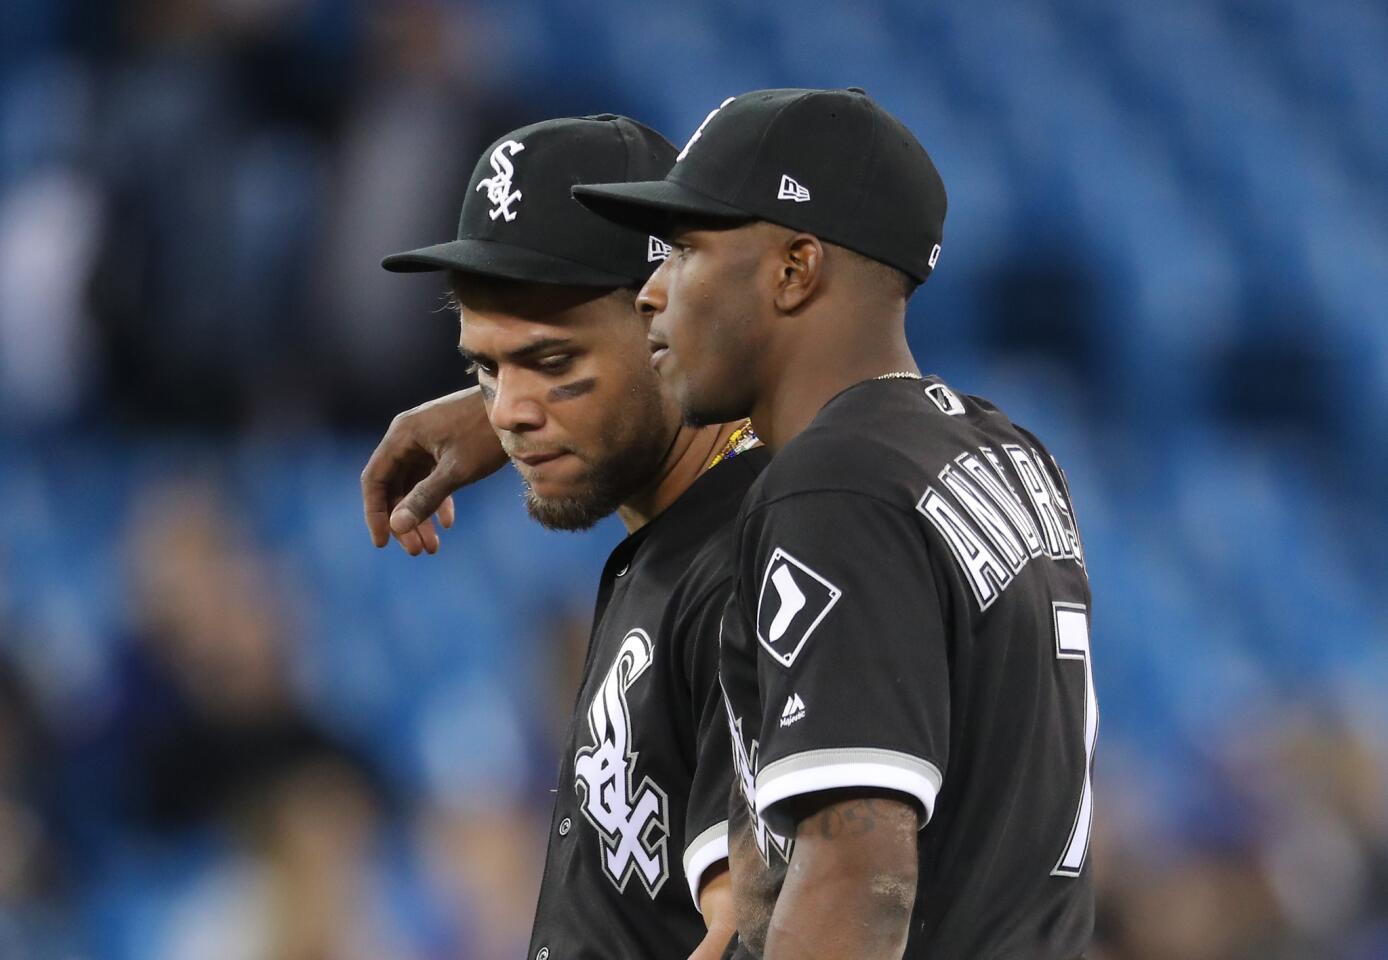 Tim Anderson puts his arm around Yoan Moncada during a pitching change in the eighth inning during MLB game action against the Toronto Blue Jays at Rogers Centre on April 3, 2018 in Toronto, Canada.